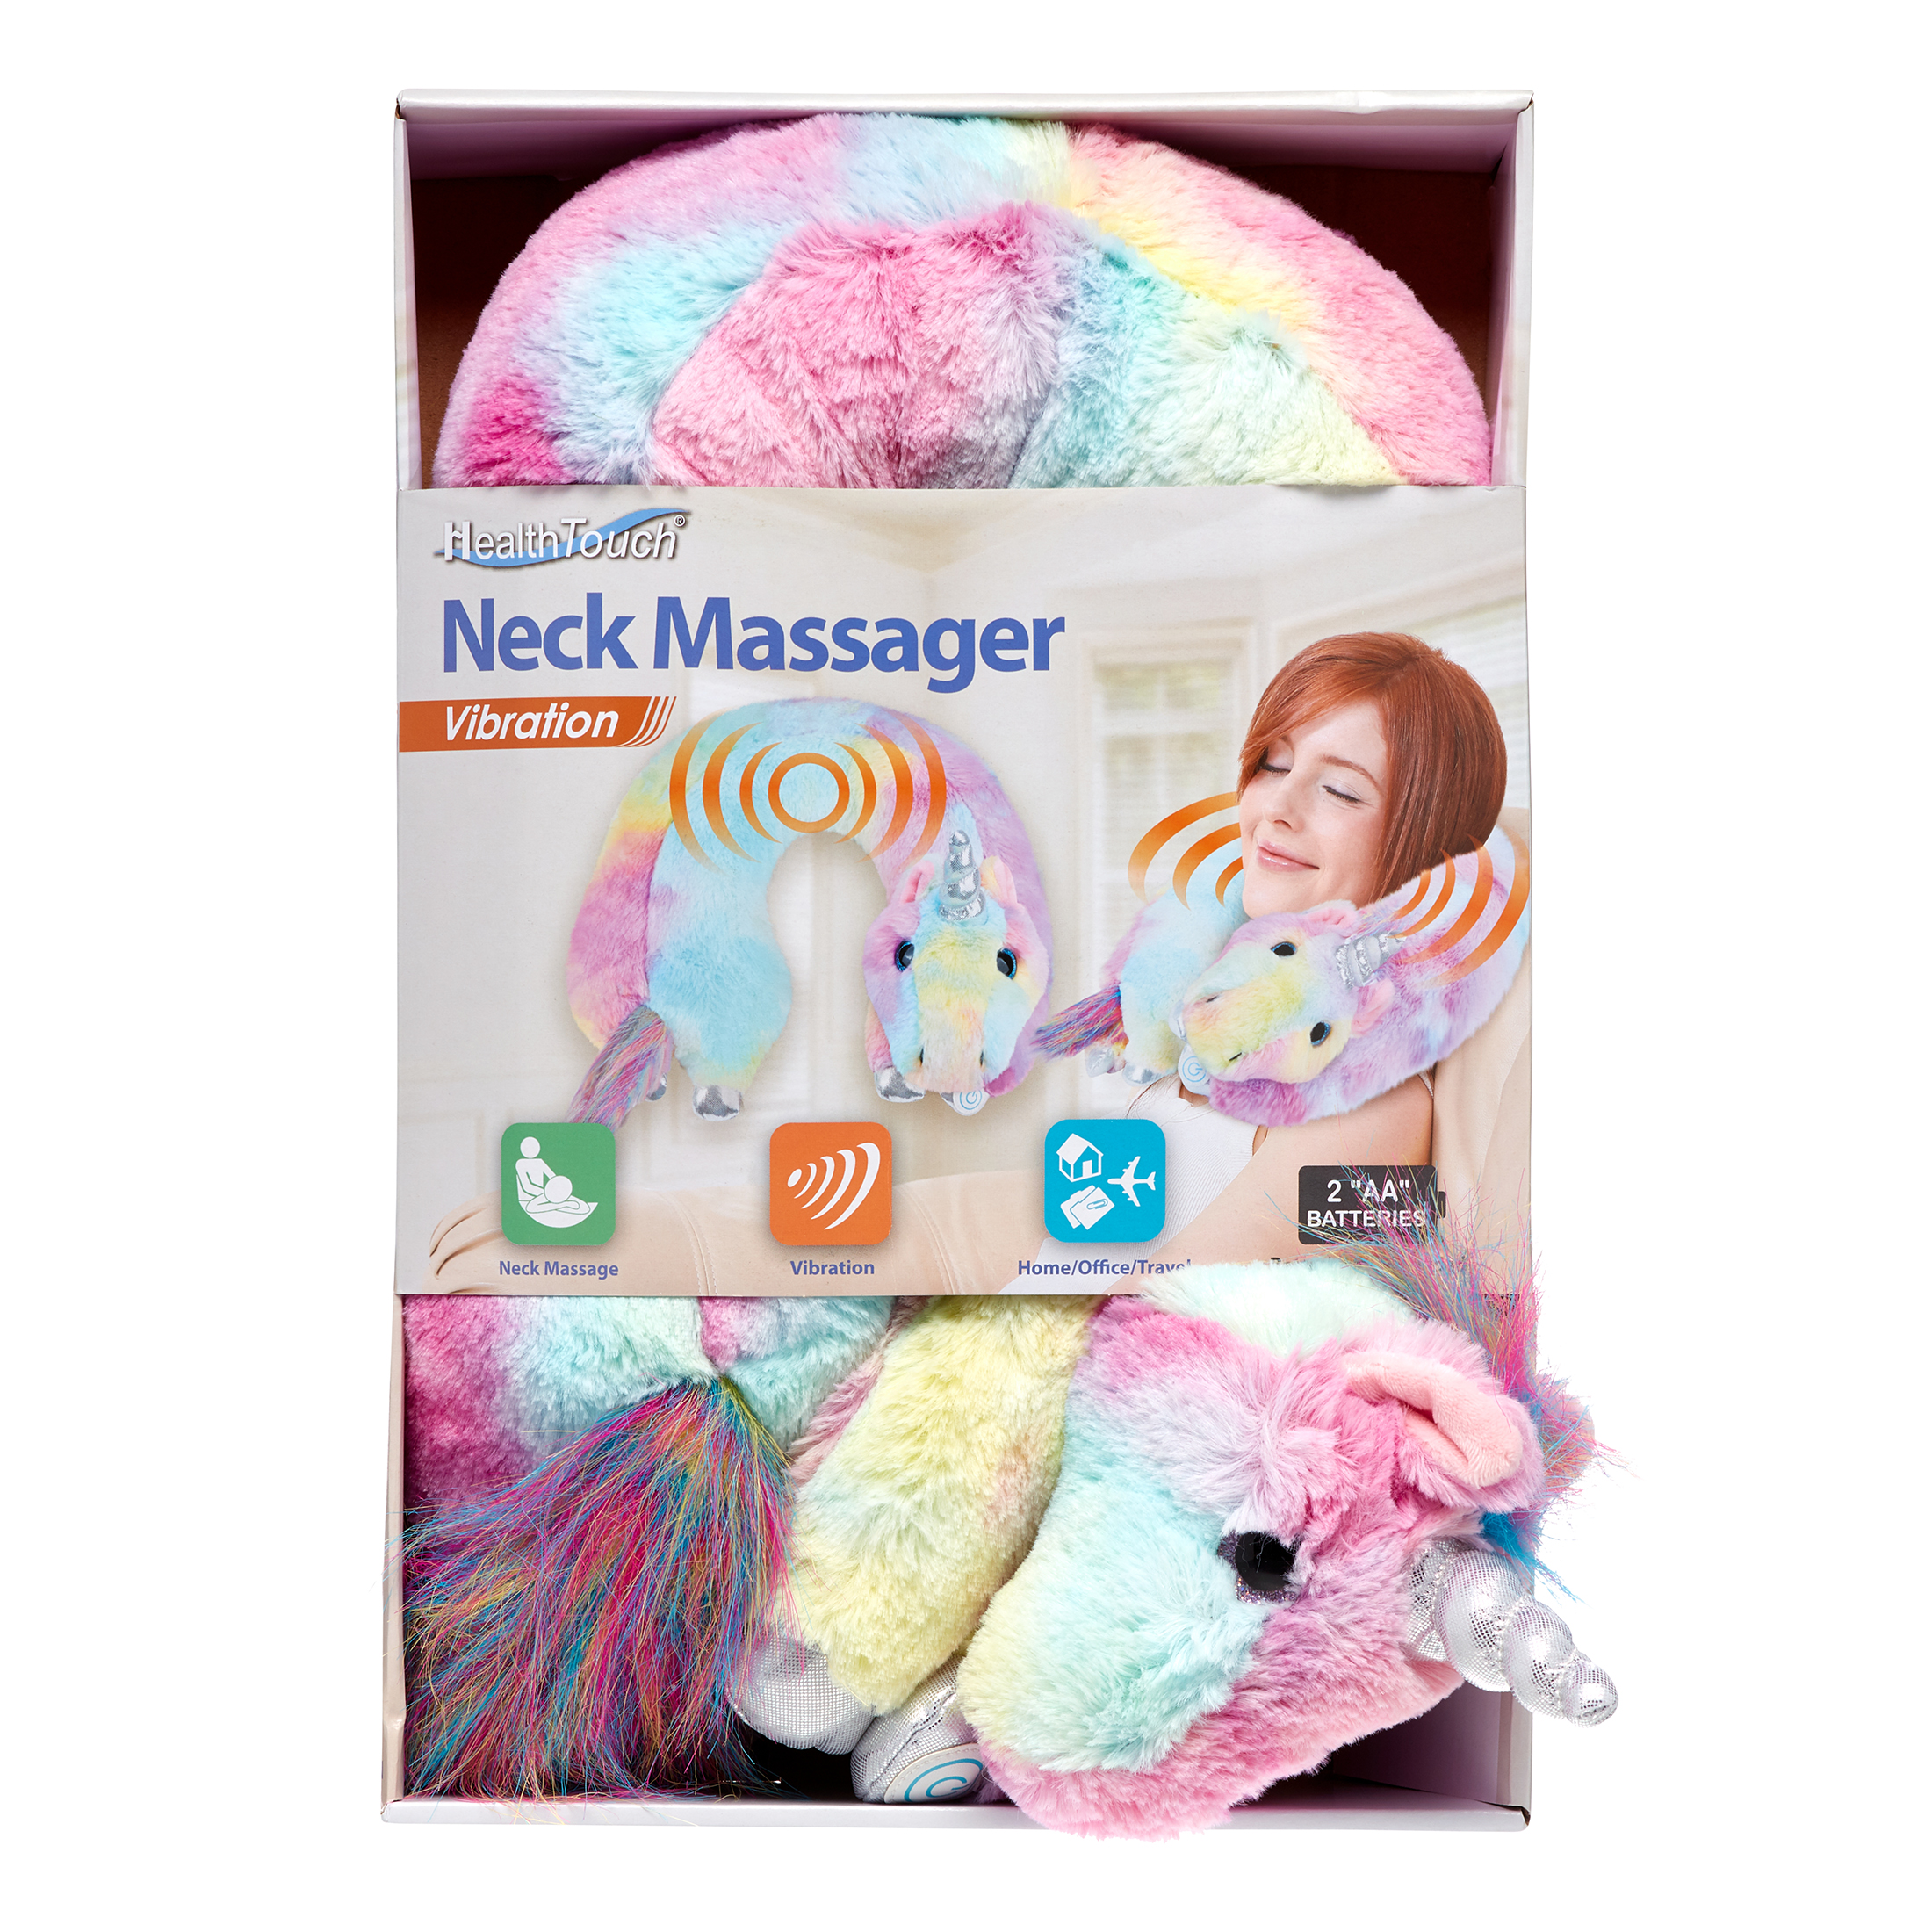 Health Touch Unicorn Neck Massager with Vibration - image 4 of 8